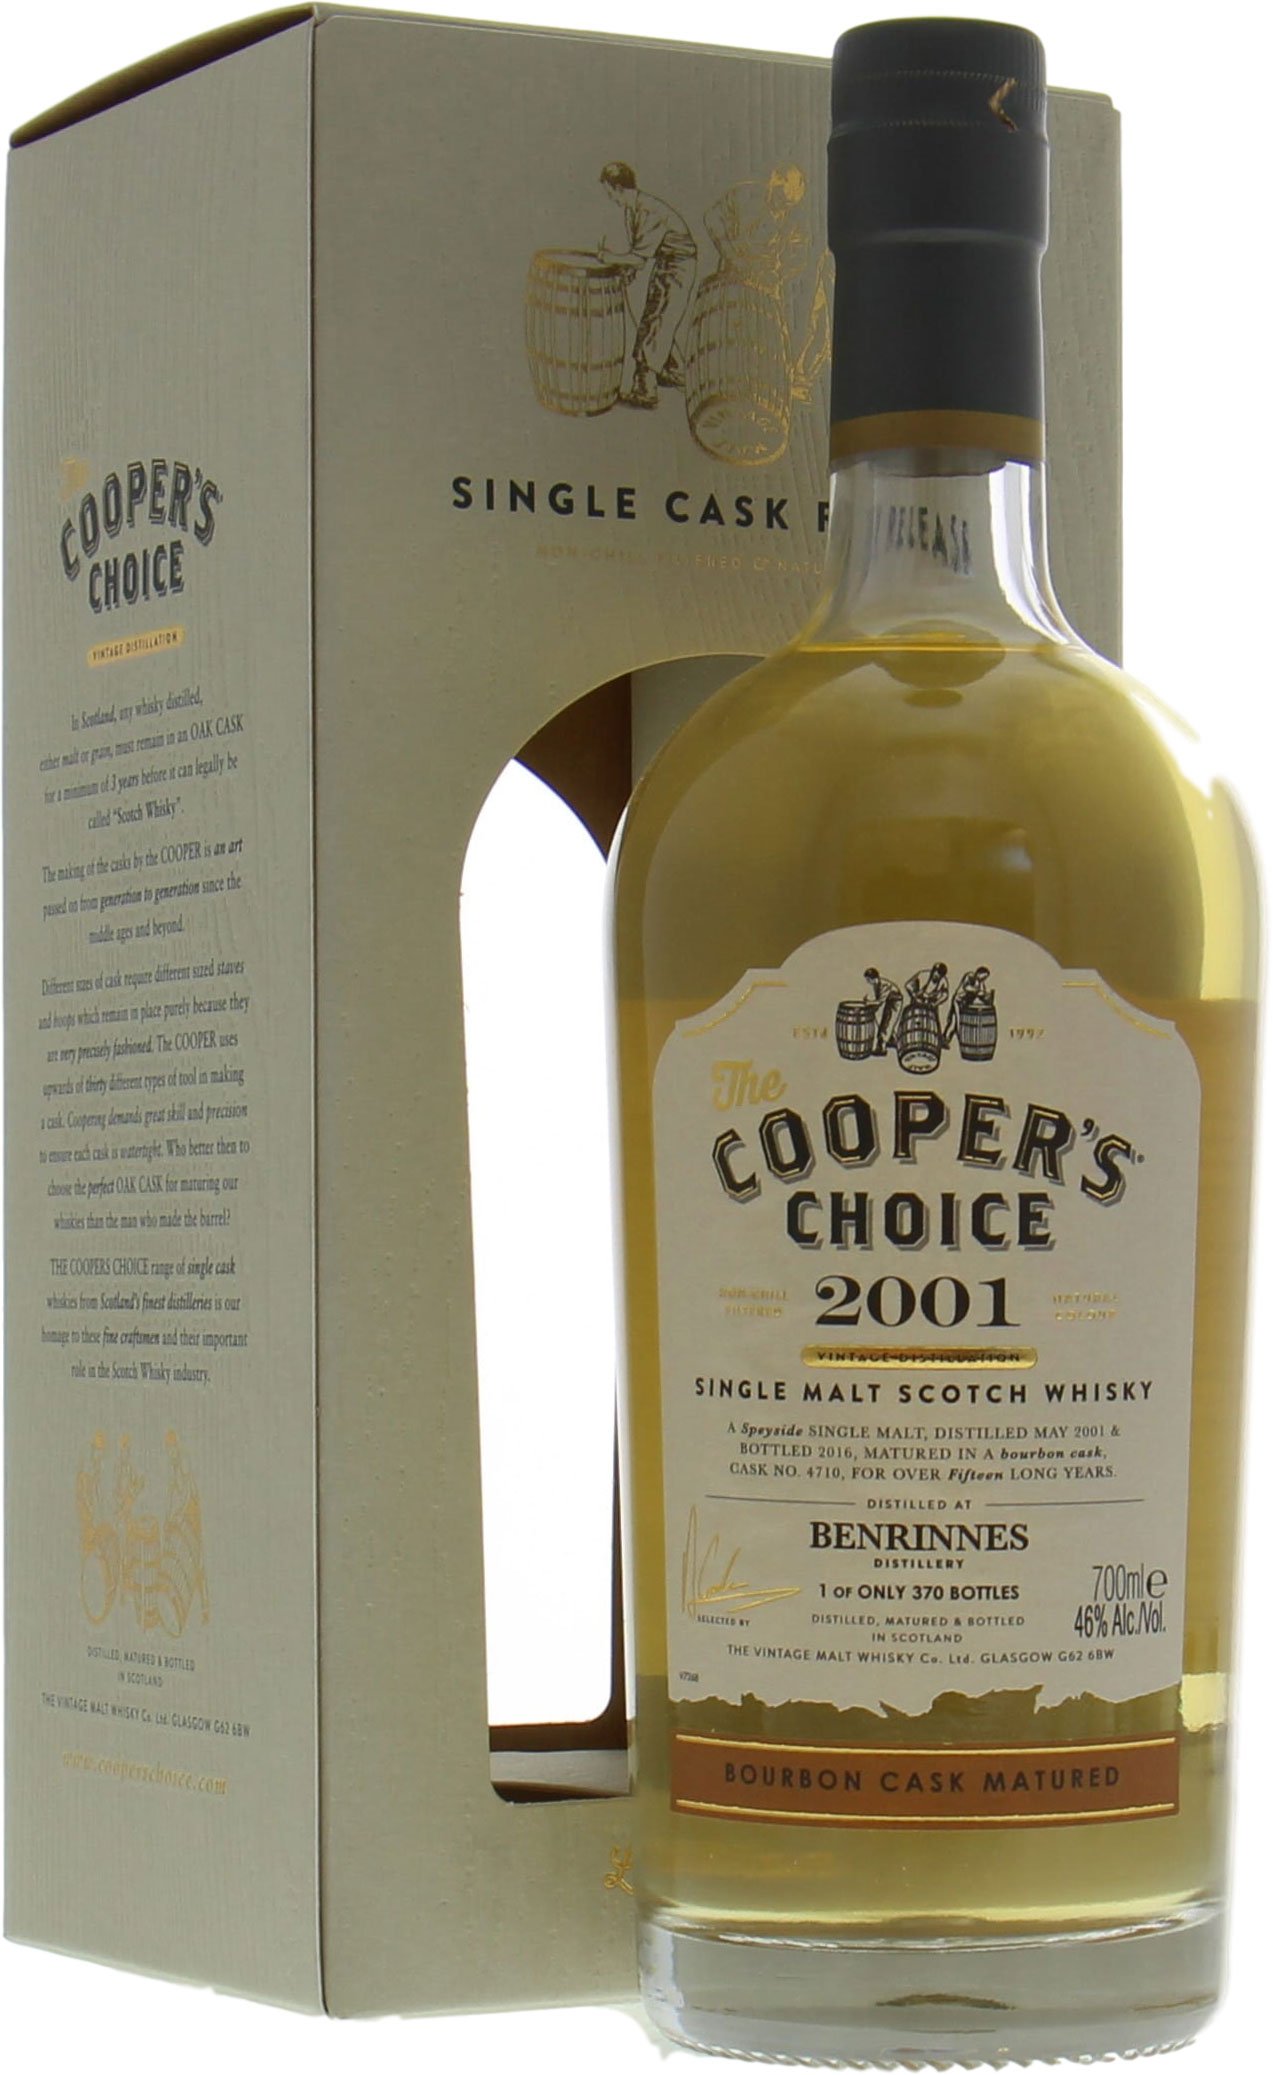 Benrinnes - 15 Years Old Cooper's Choice Cask:4710 46% 2001